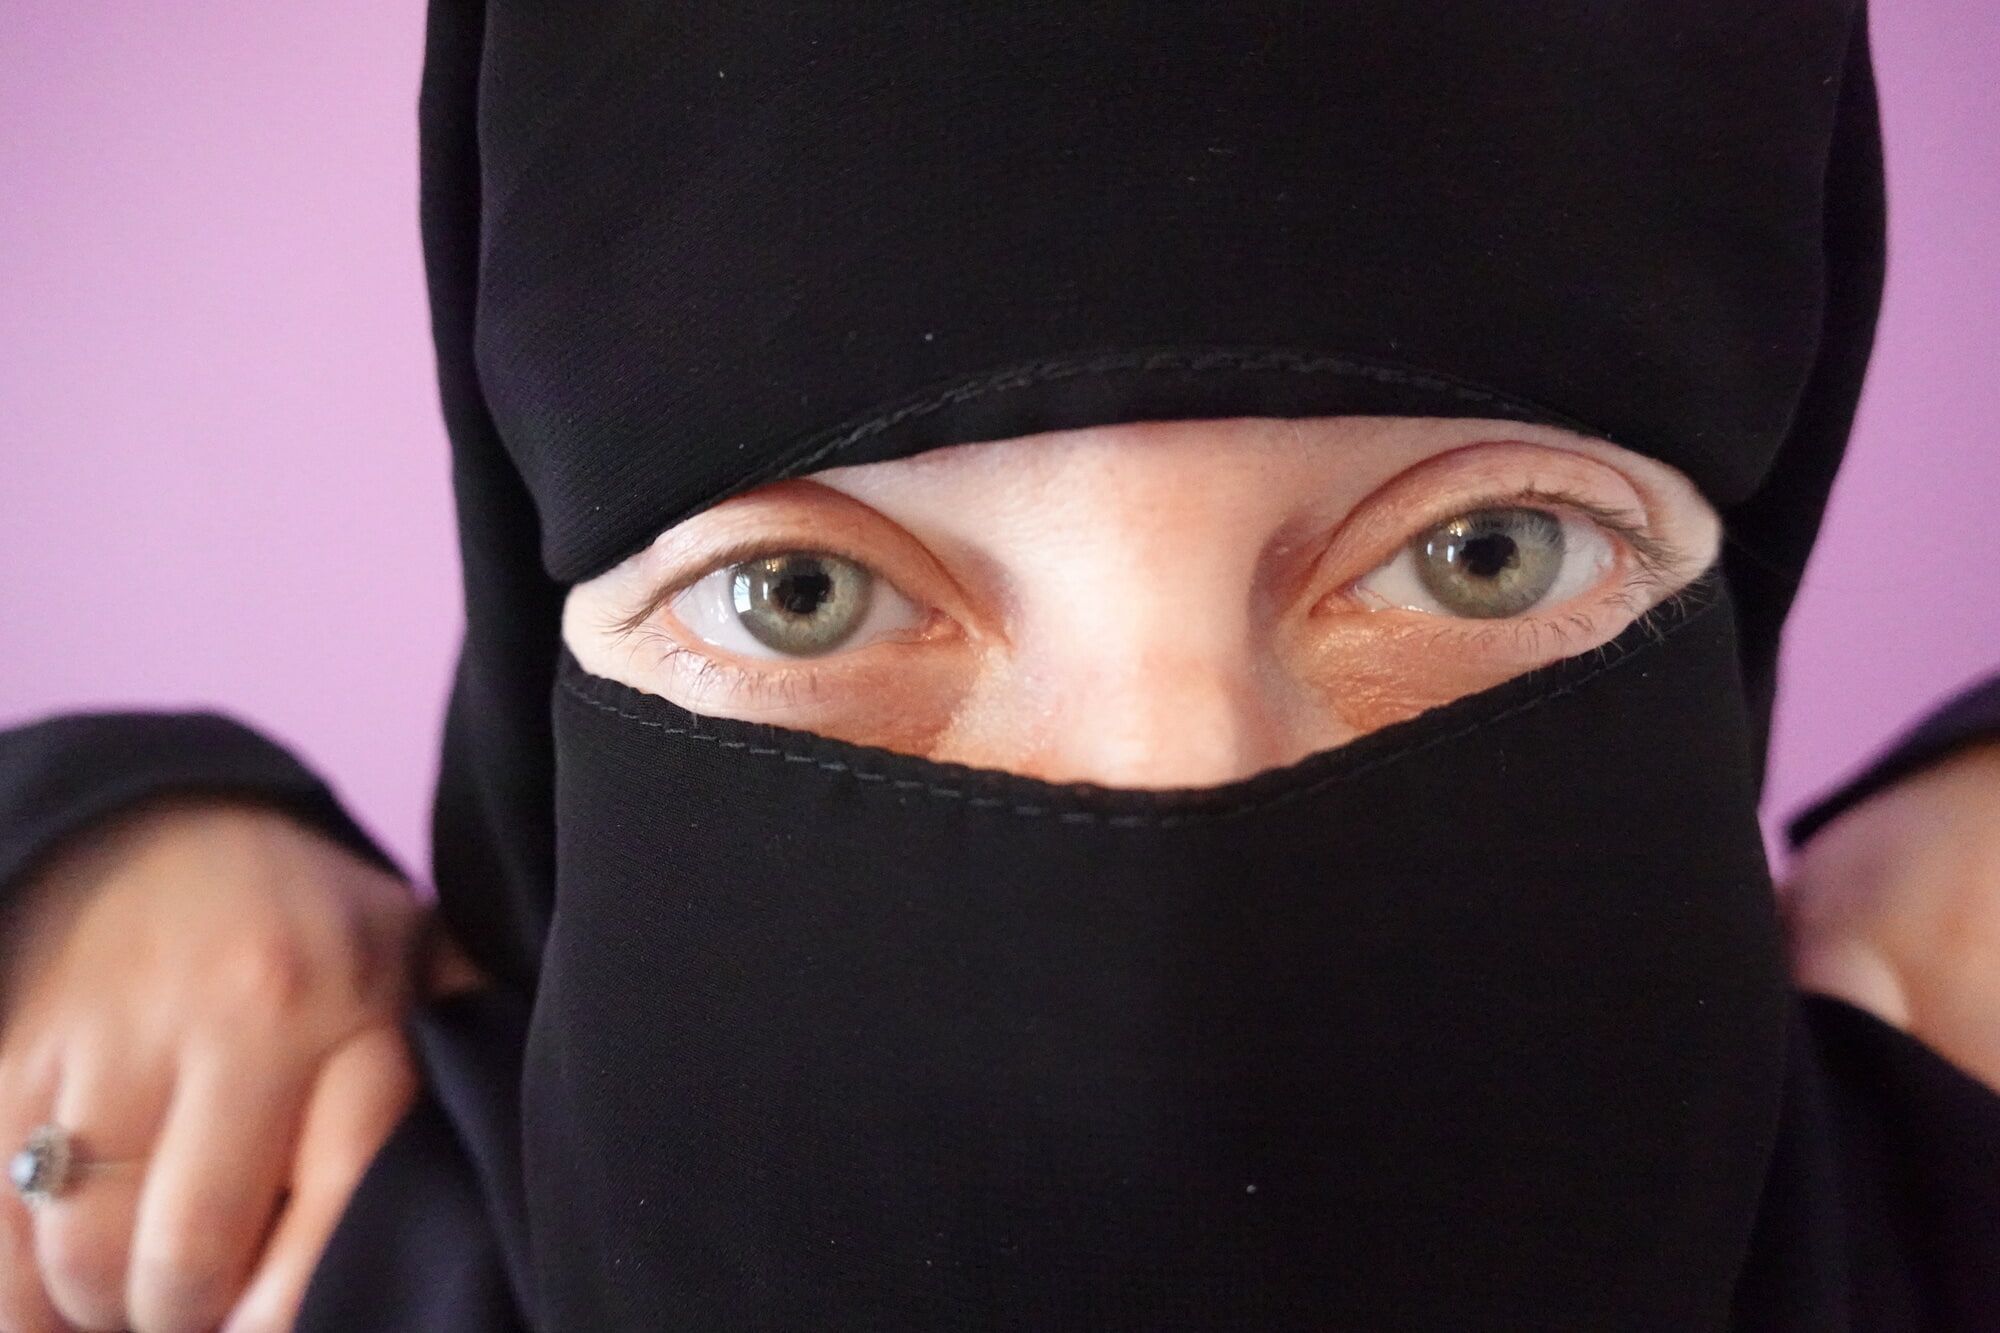 wife wearing Burqa with Niqab naked underneath #22